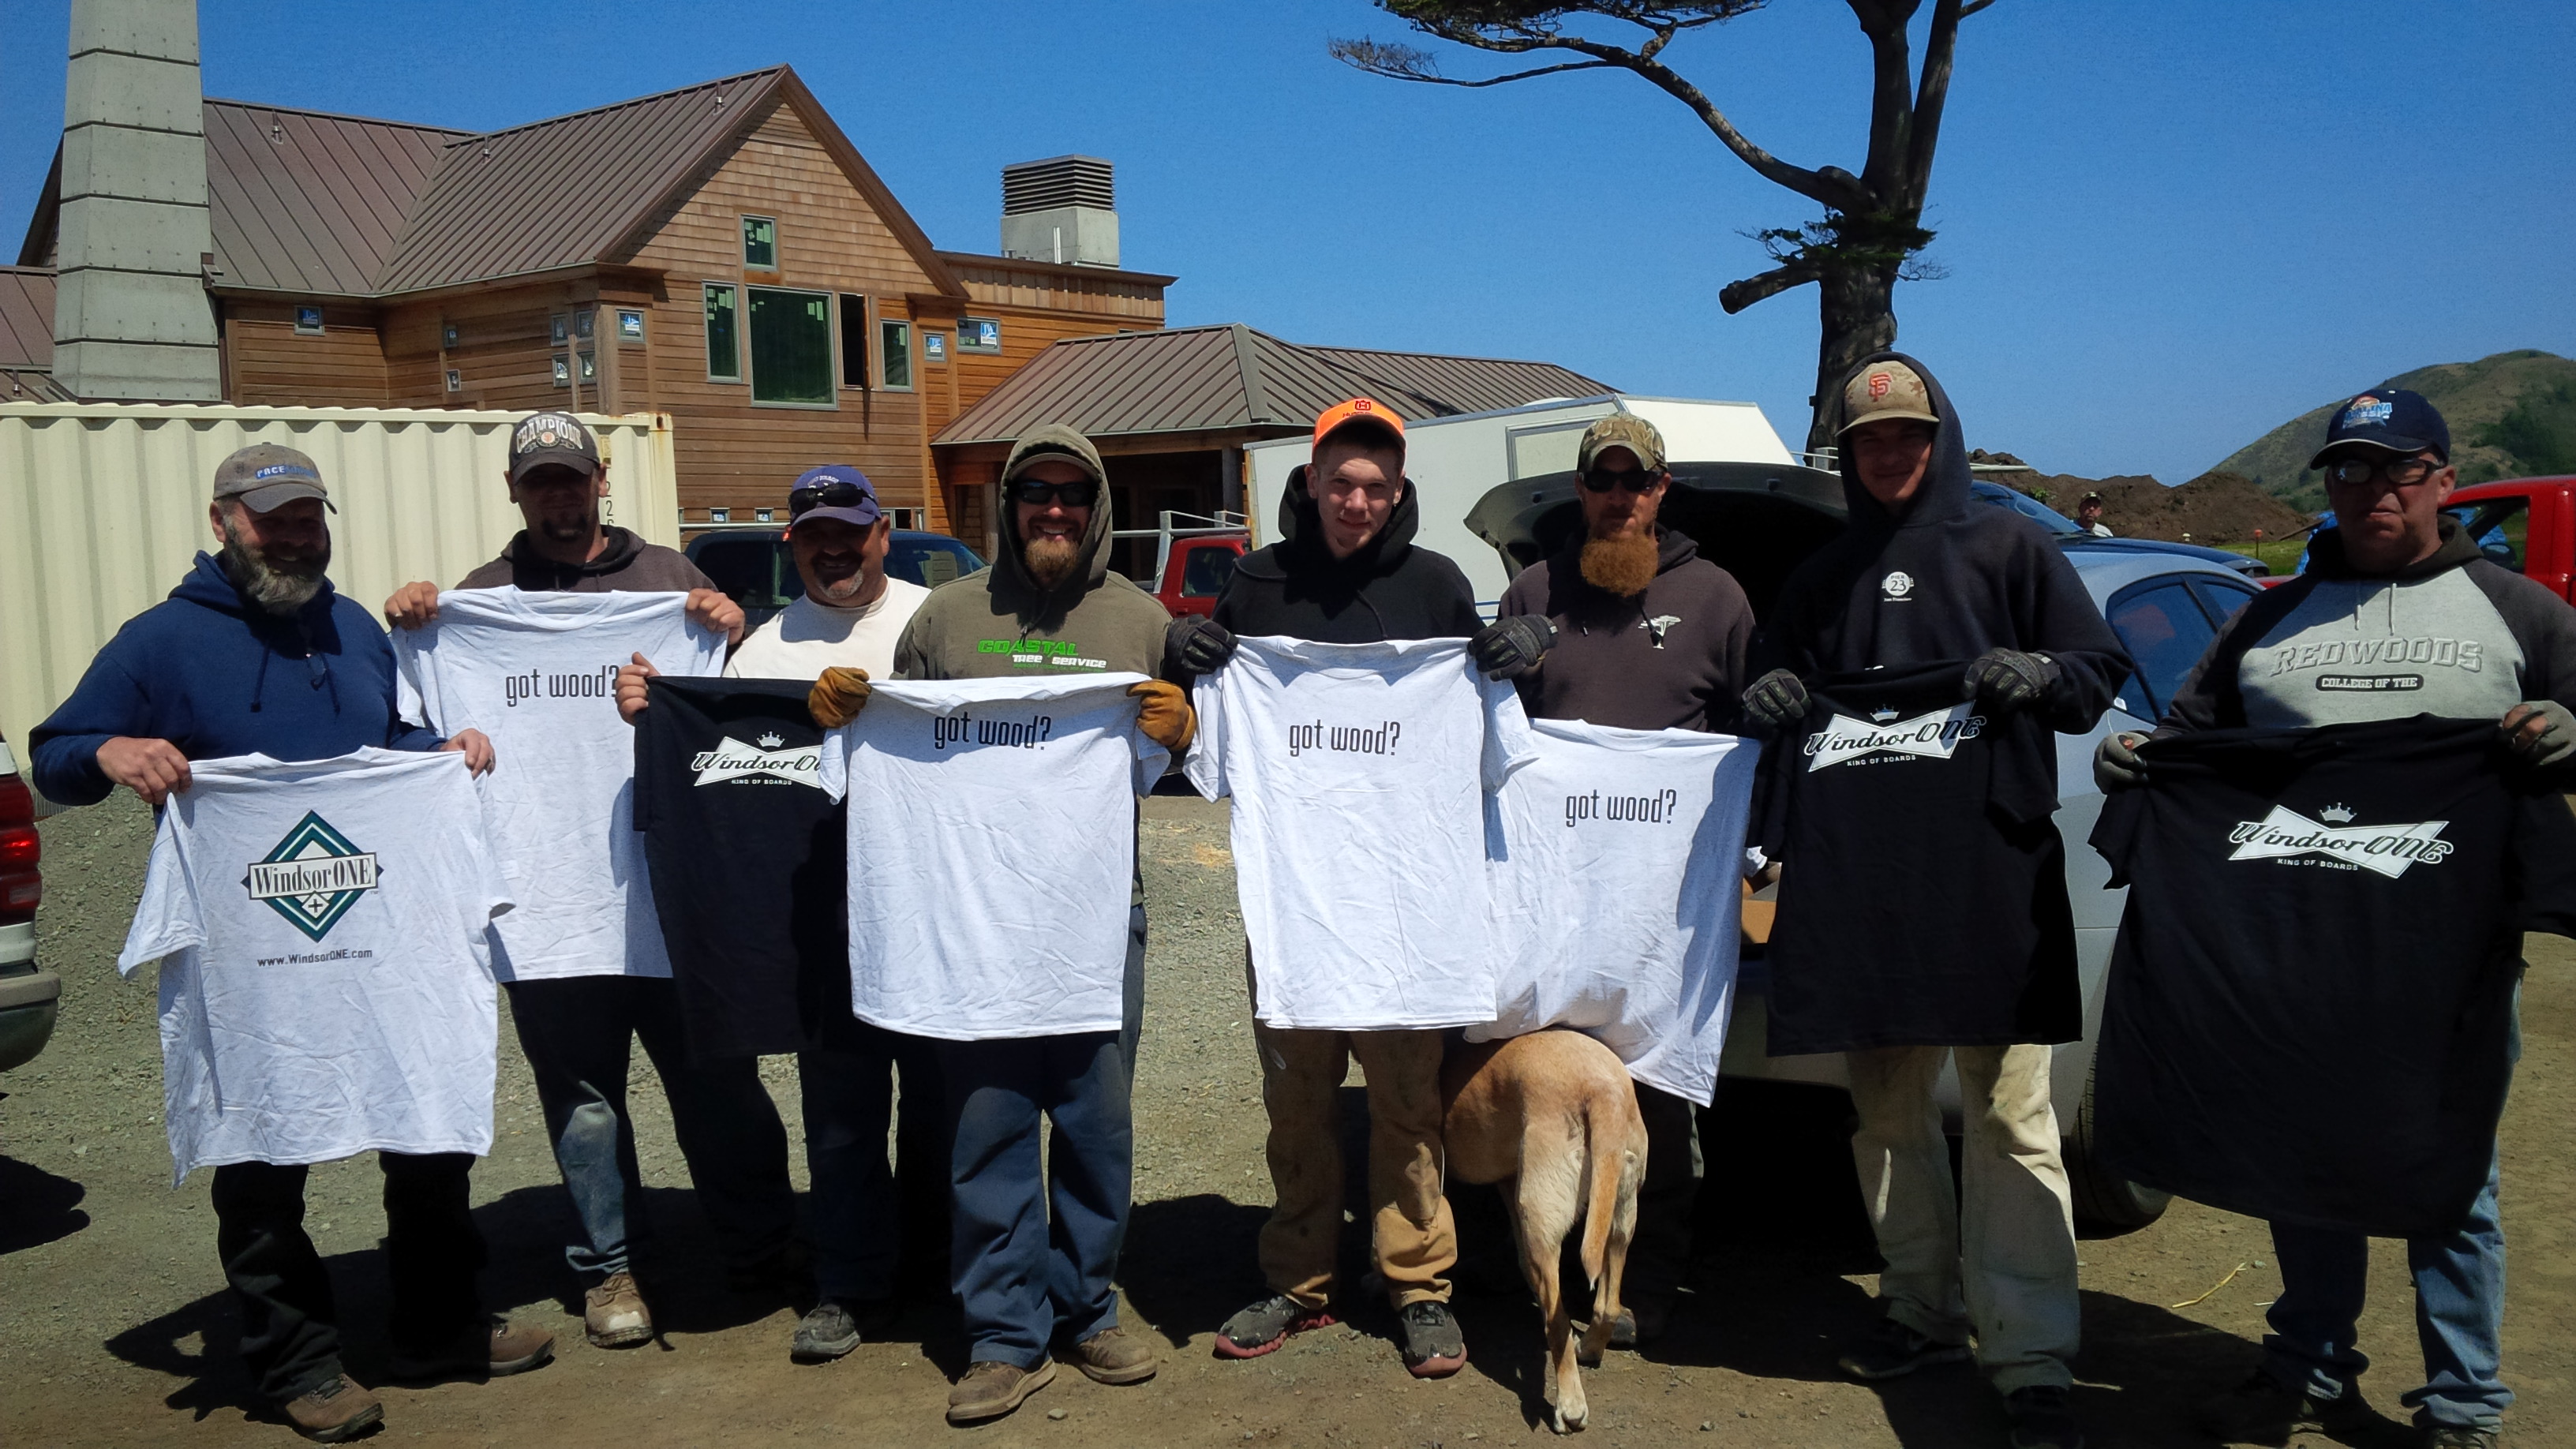 WindsorONE Covers the Crew at Brent Anderson Construction-Fort Bragg, CA